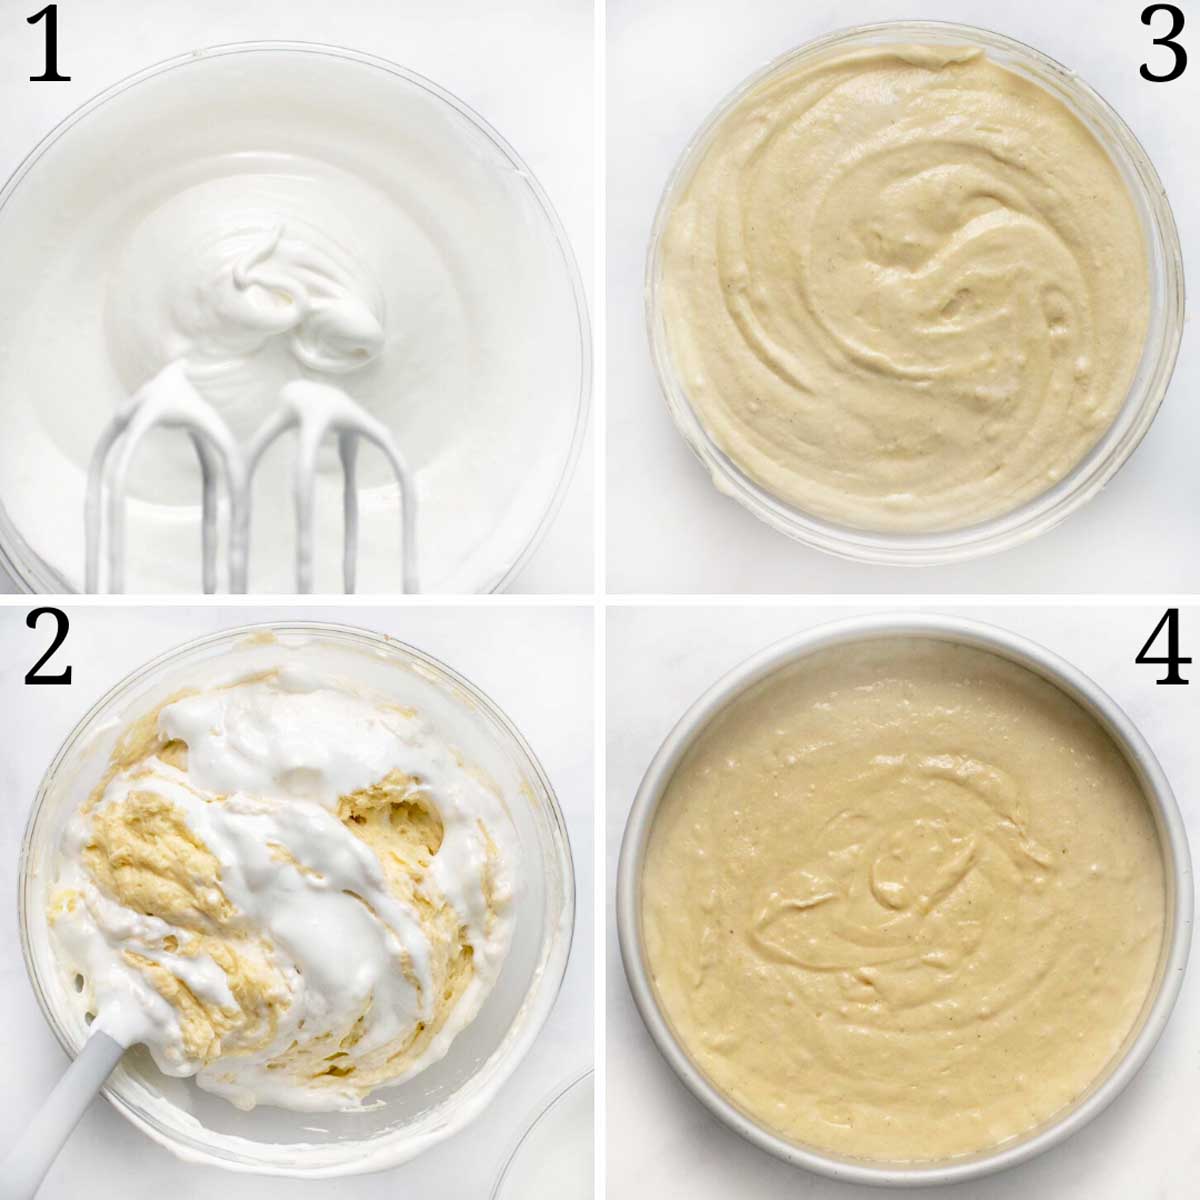 four images showing how to add the egg whites to the yellow cake